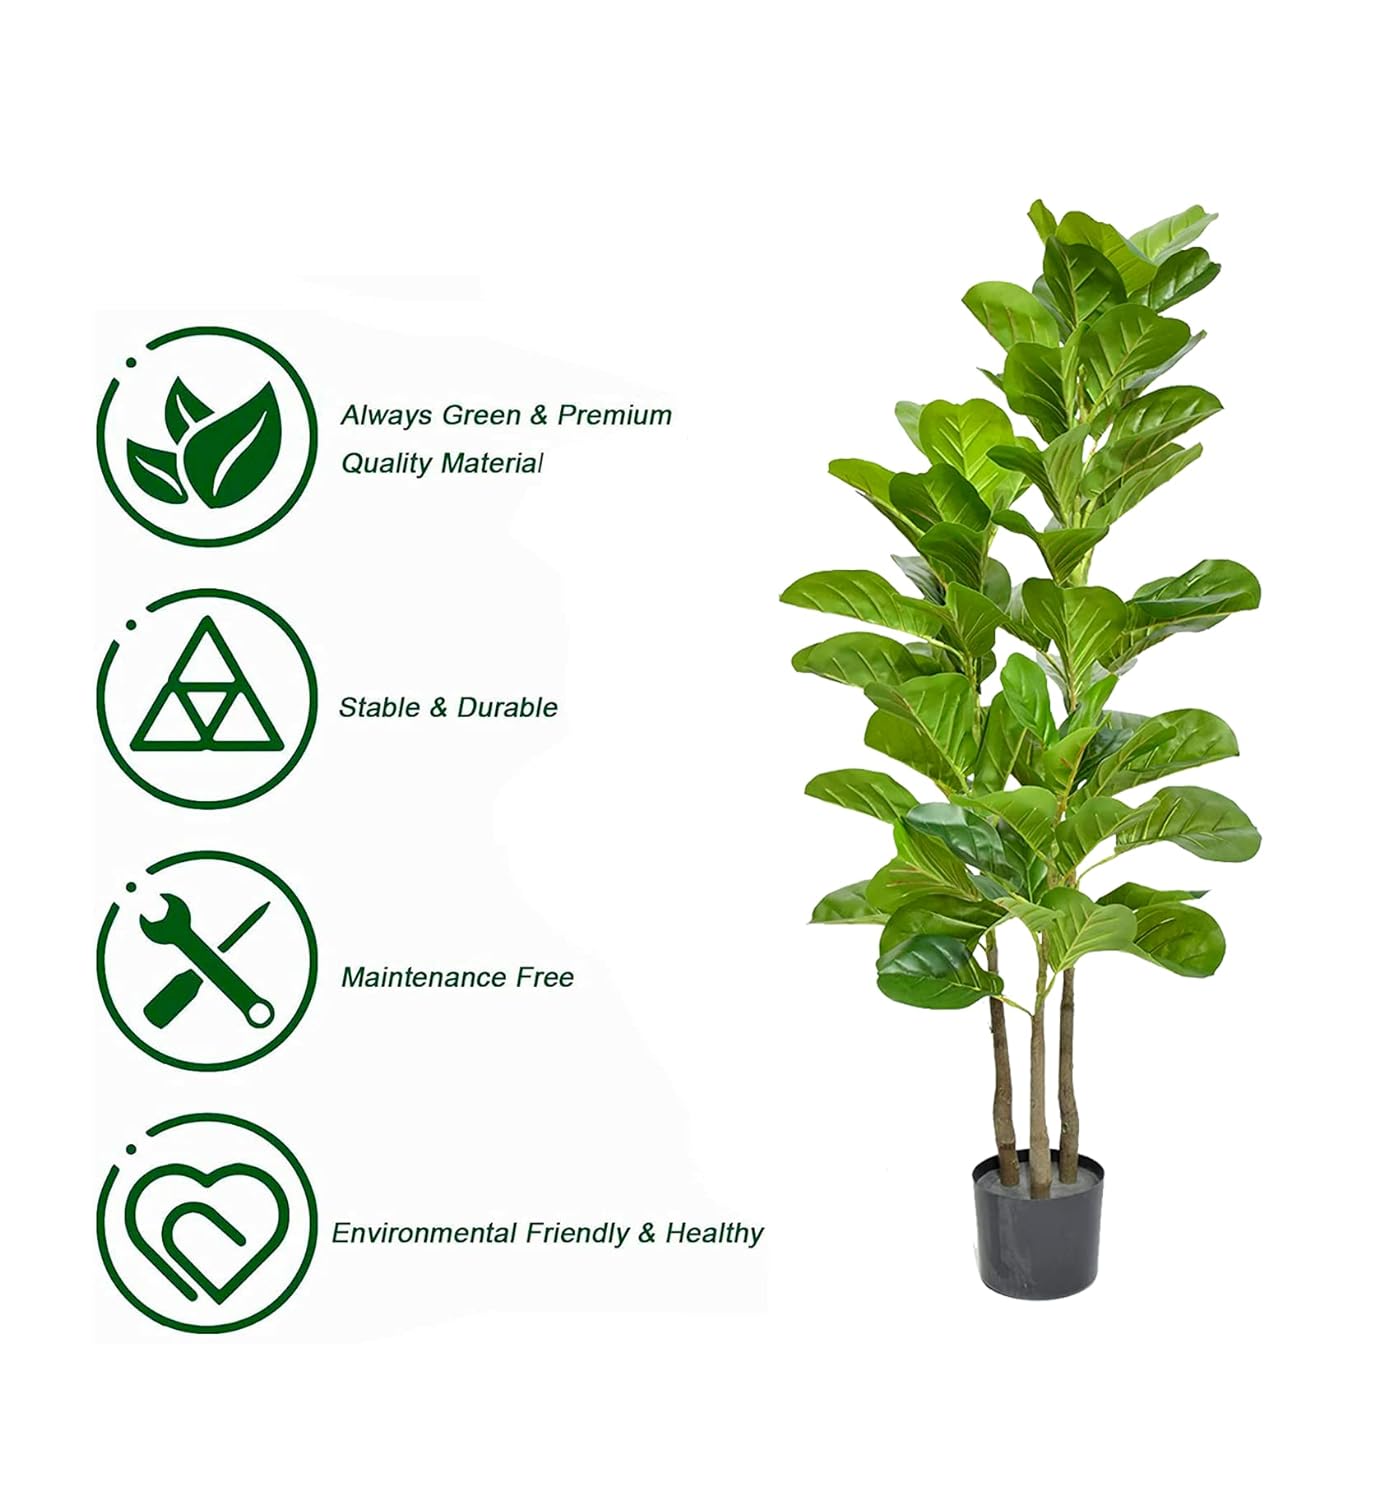 Kayra Decor 4 Feet Fiddle Leaf Fig Tree - Big Artificial Plants for Home Decor with Pot (Black)